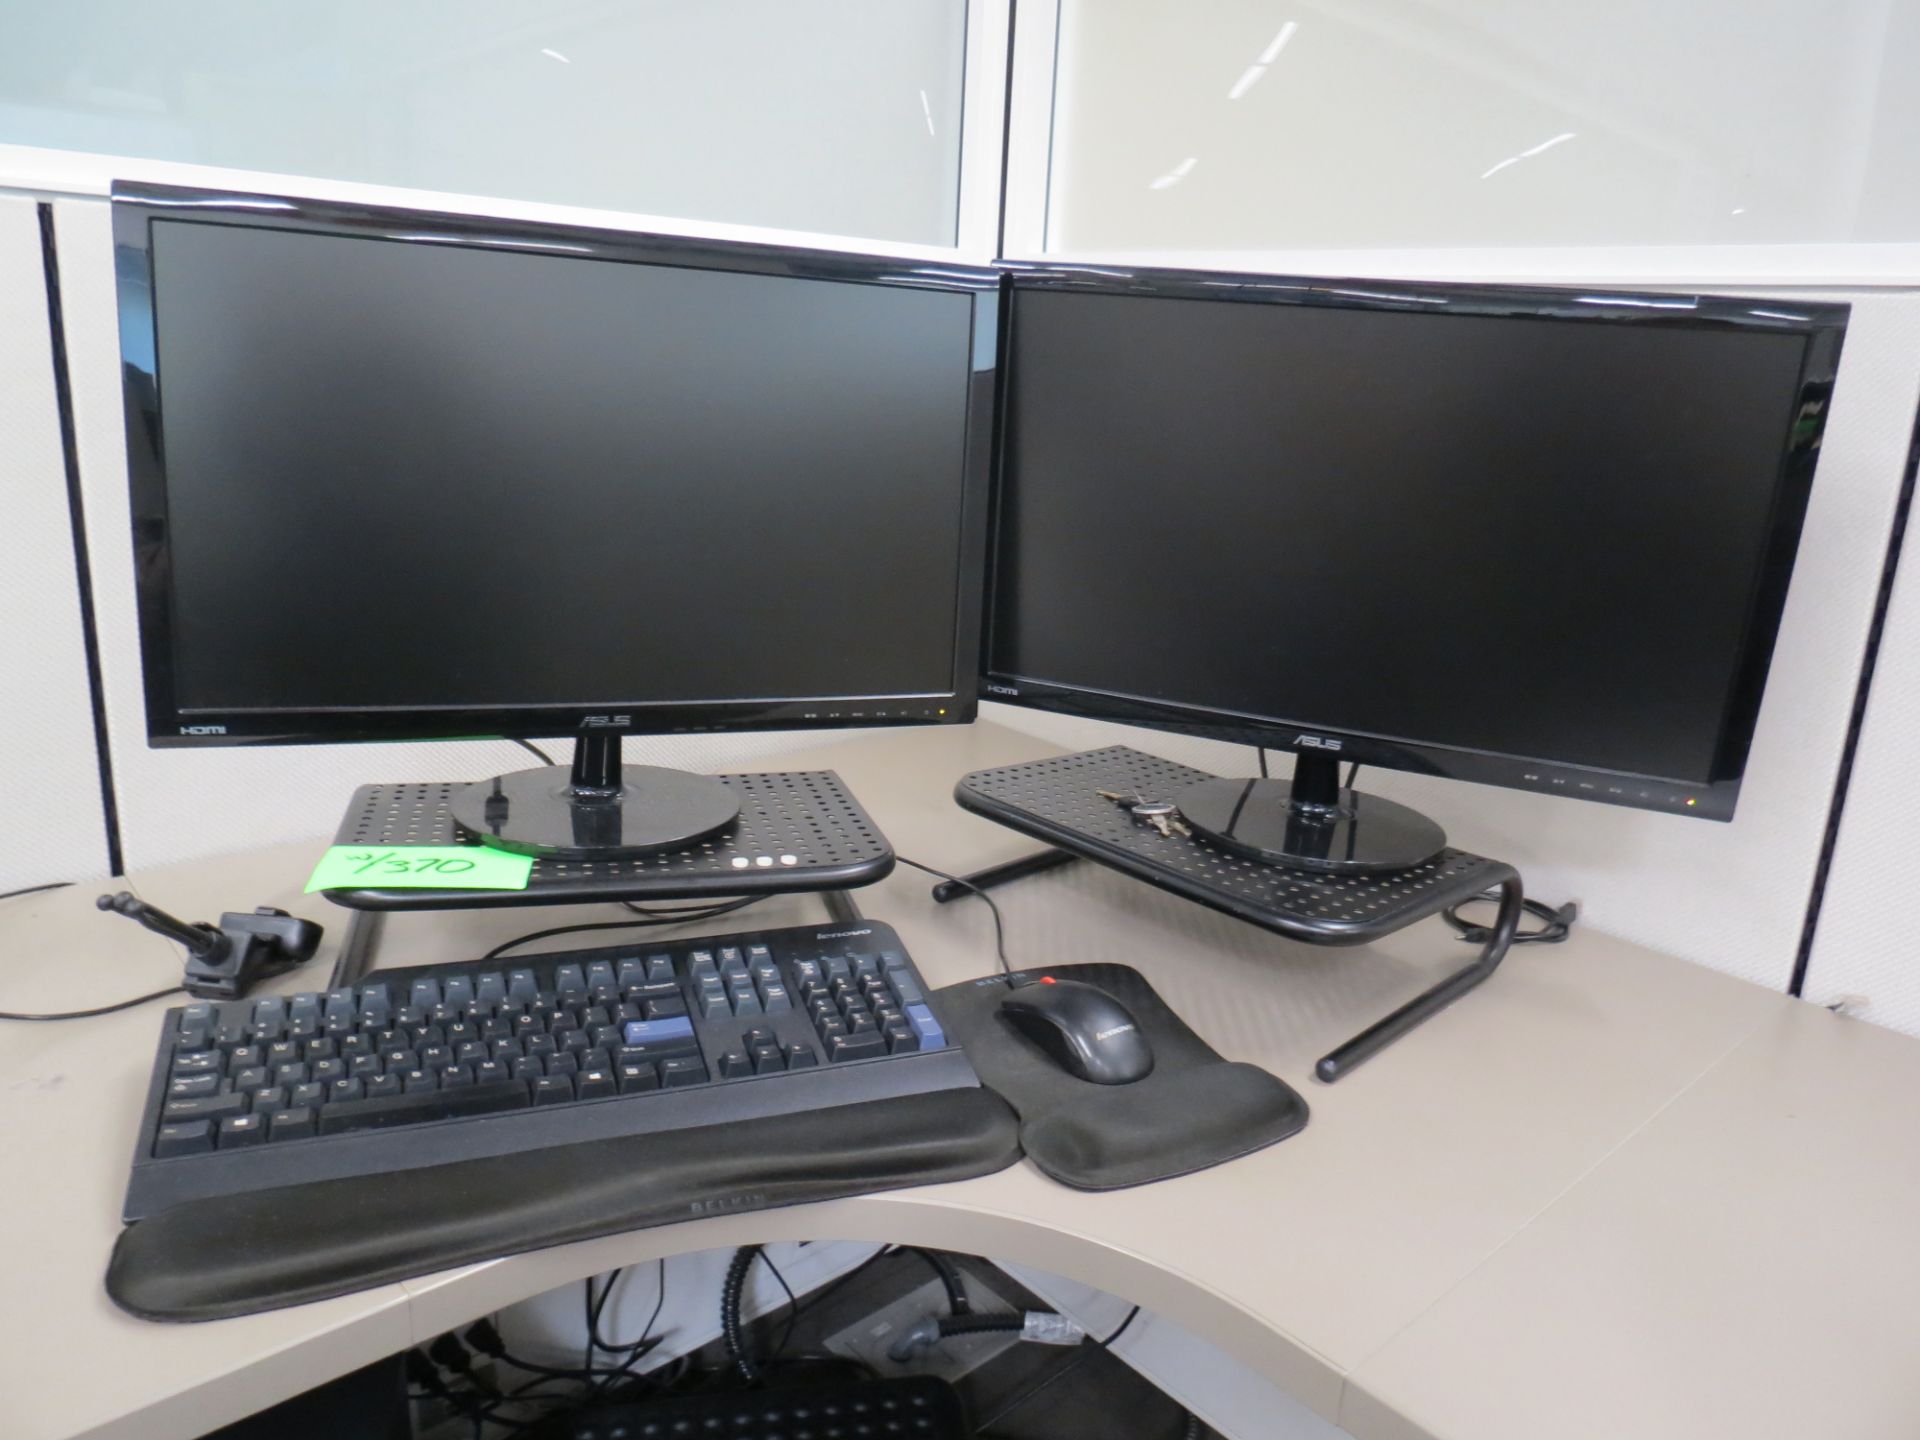 2 LENOVO THINKCENTRE TOWER DESKTOPS, P-TOUCH QL-500 & BROTHER LABEL PRINTERS, 4 MONITORS, - Image 7 of 8